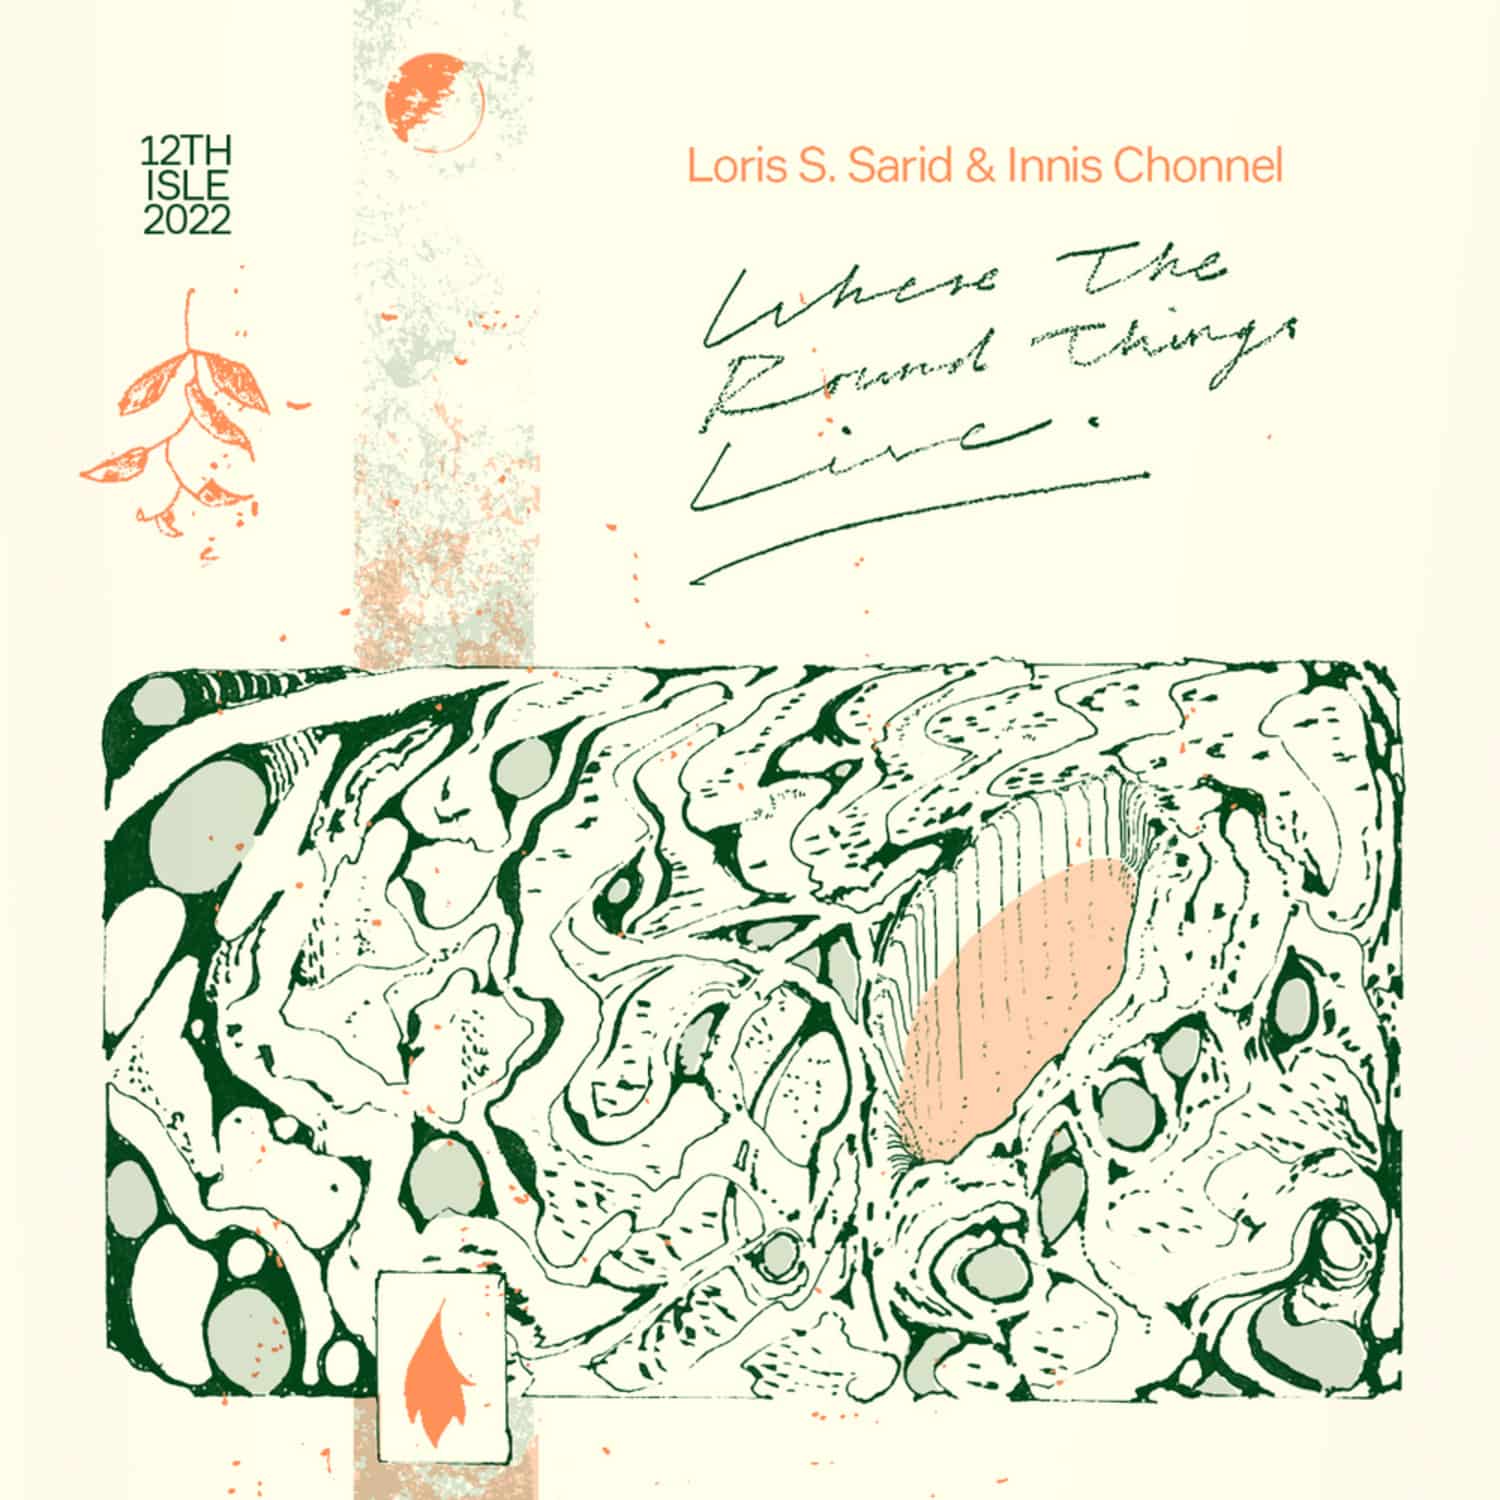 Loris S. Sarid & Innis Chonnel - WHERE THE ROUND THINGS LIVE 